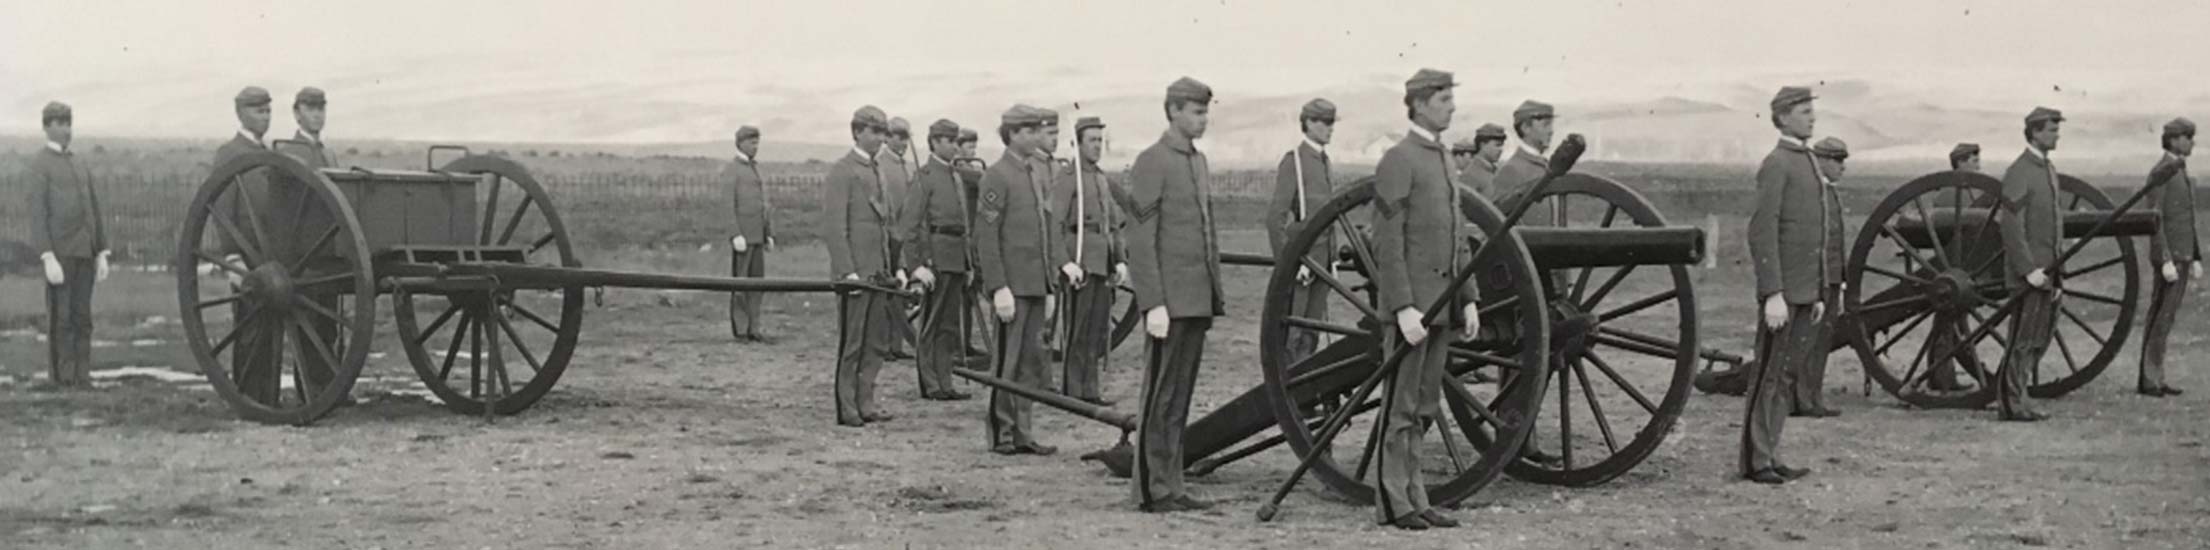 Historical photo of Army ROTC by cannons